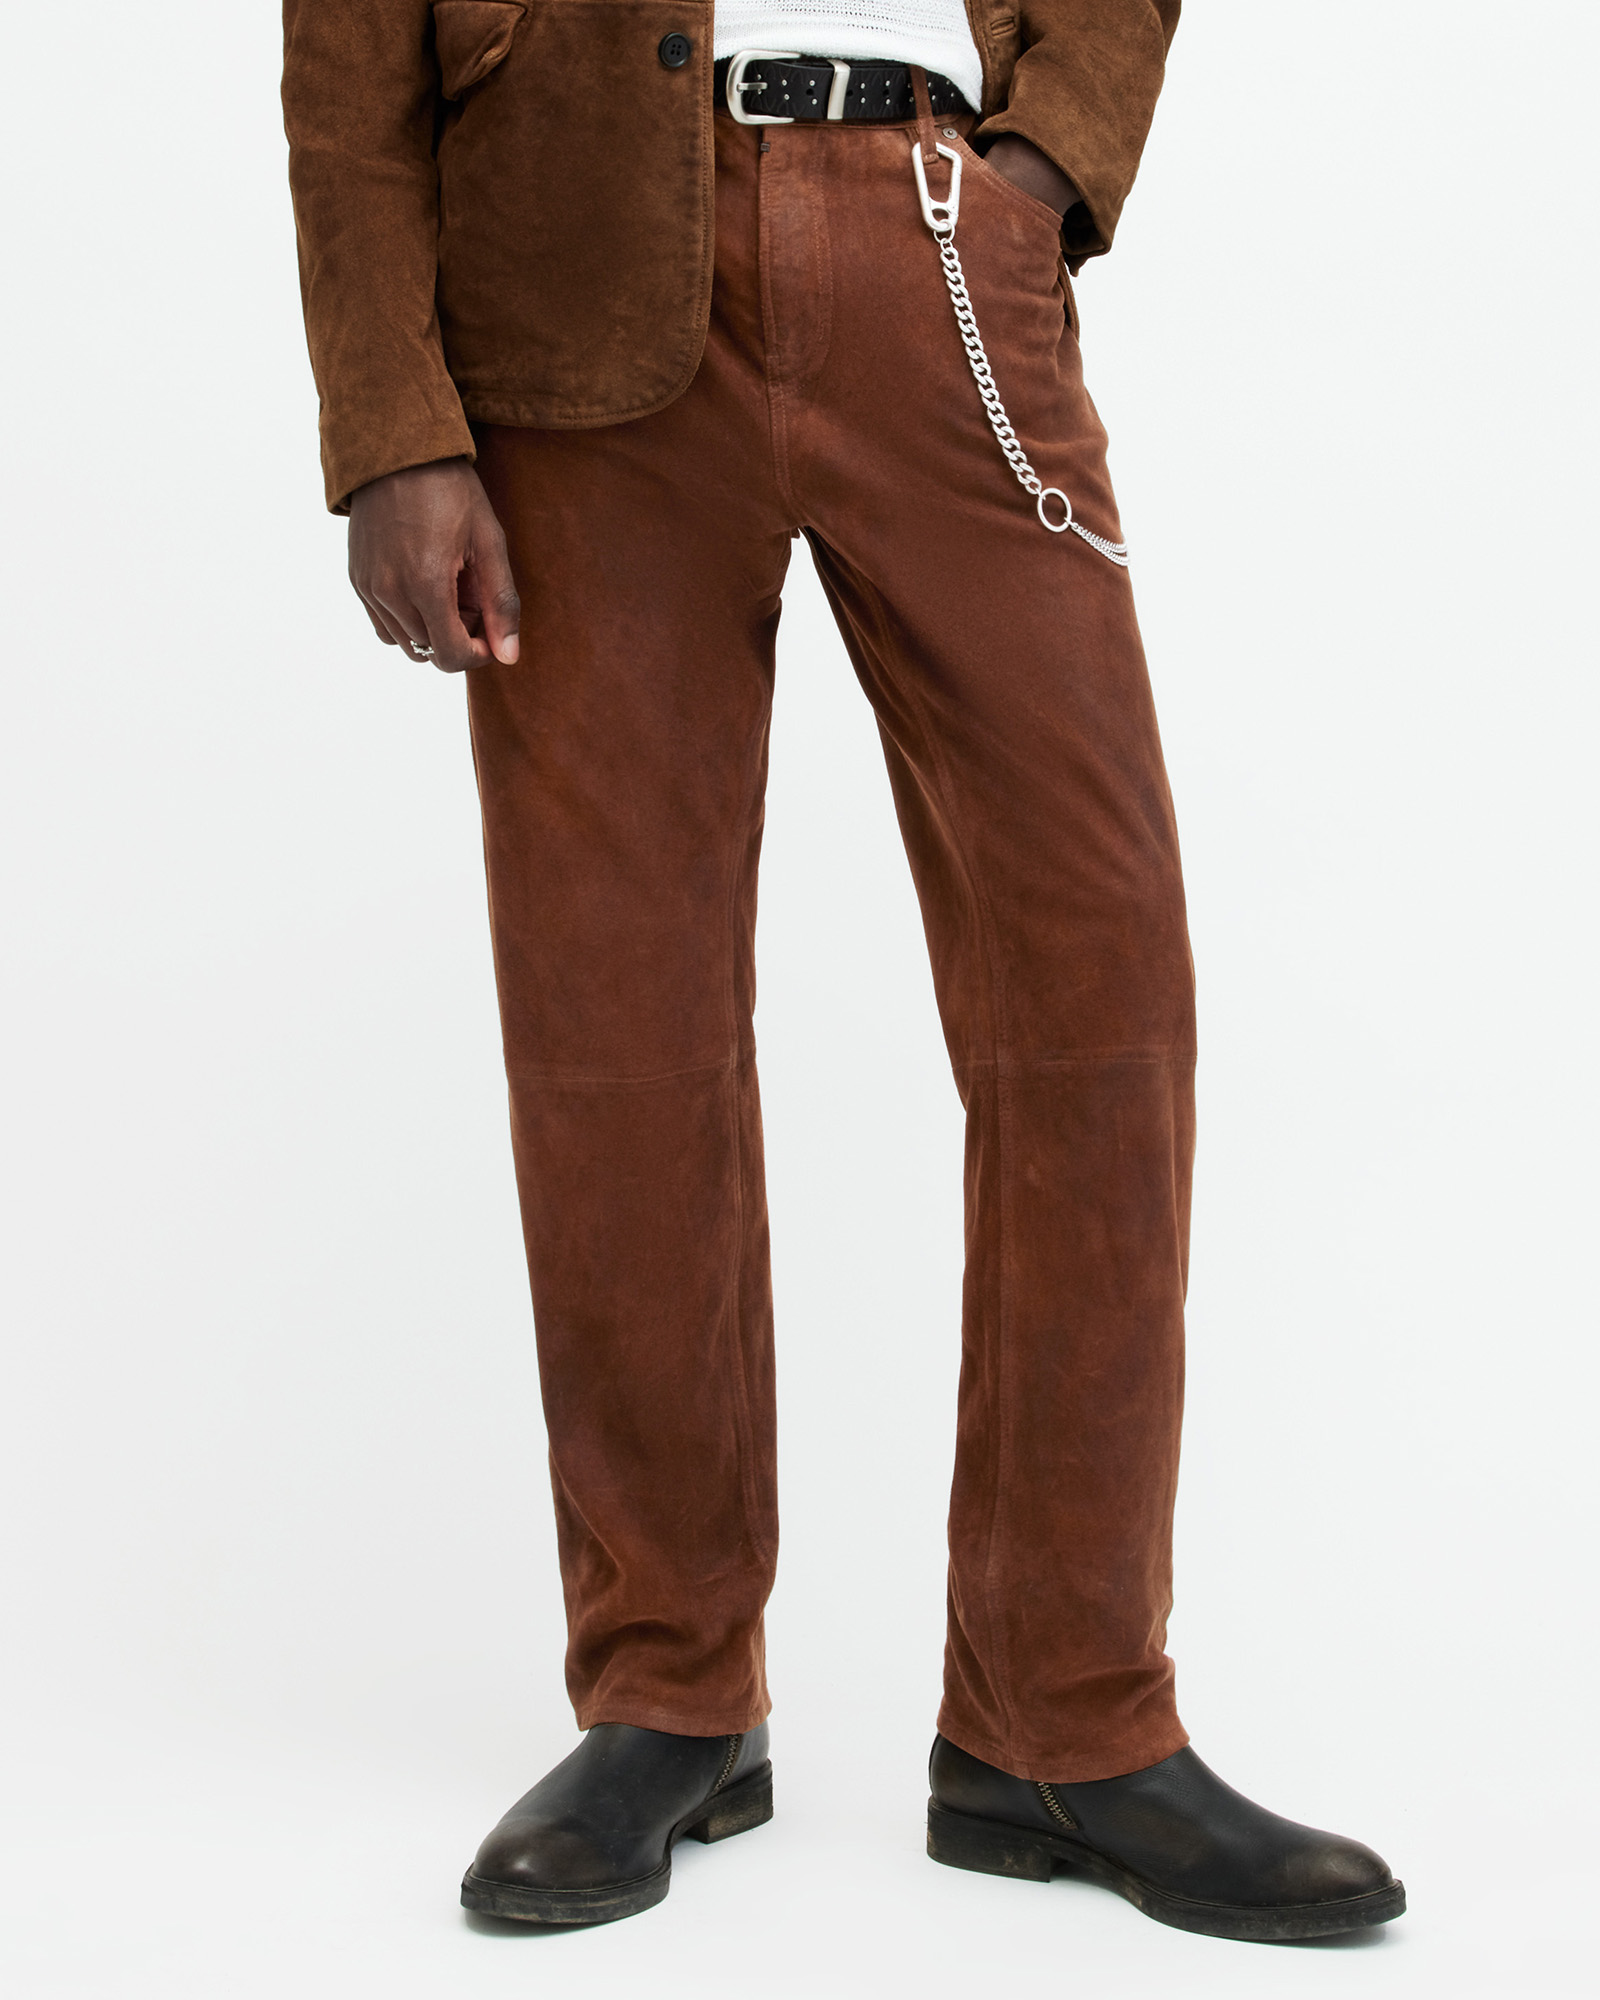 AllSaints Lynch Straight Fit Leather Trousers,, Tan Brown